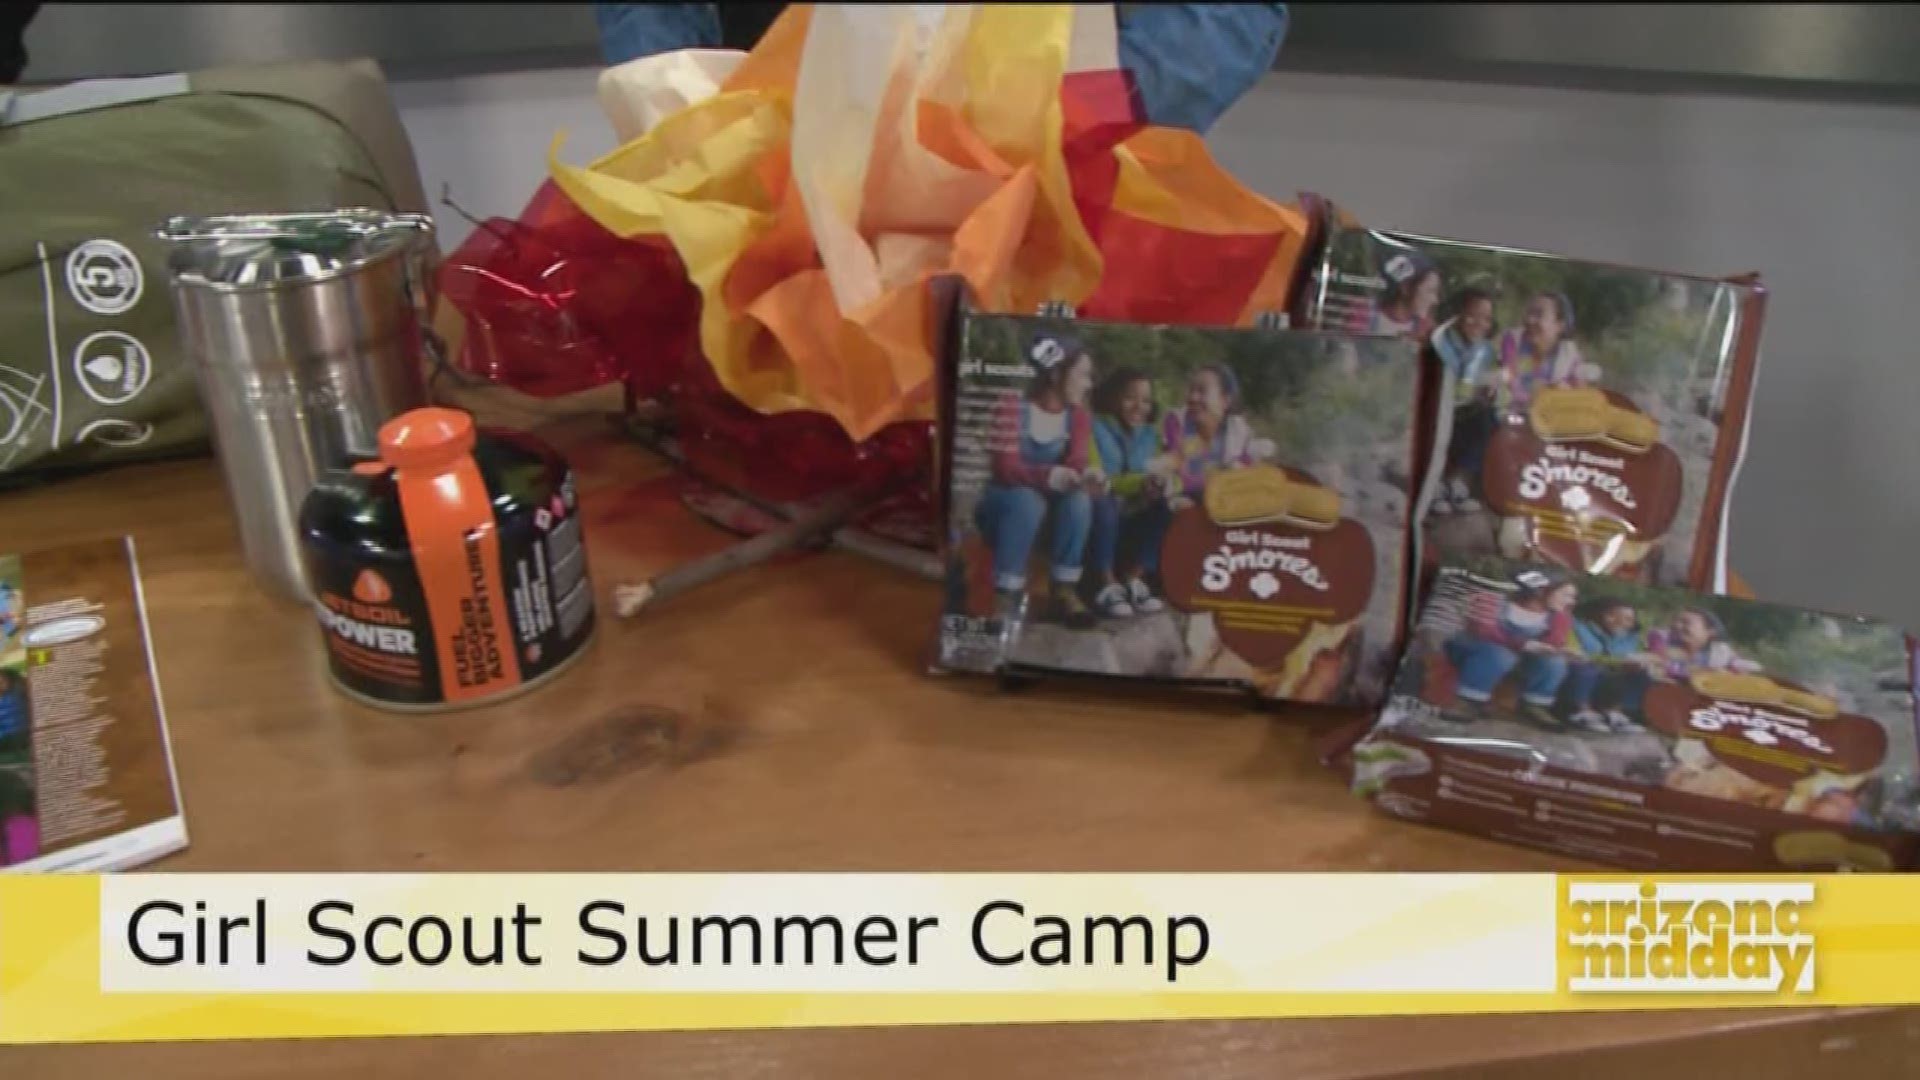 Girl Scouts AZ's Vianca Navarete gives us the scoop on the 2019 Girl Scout Summer Camp